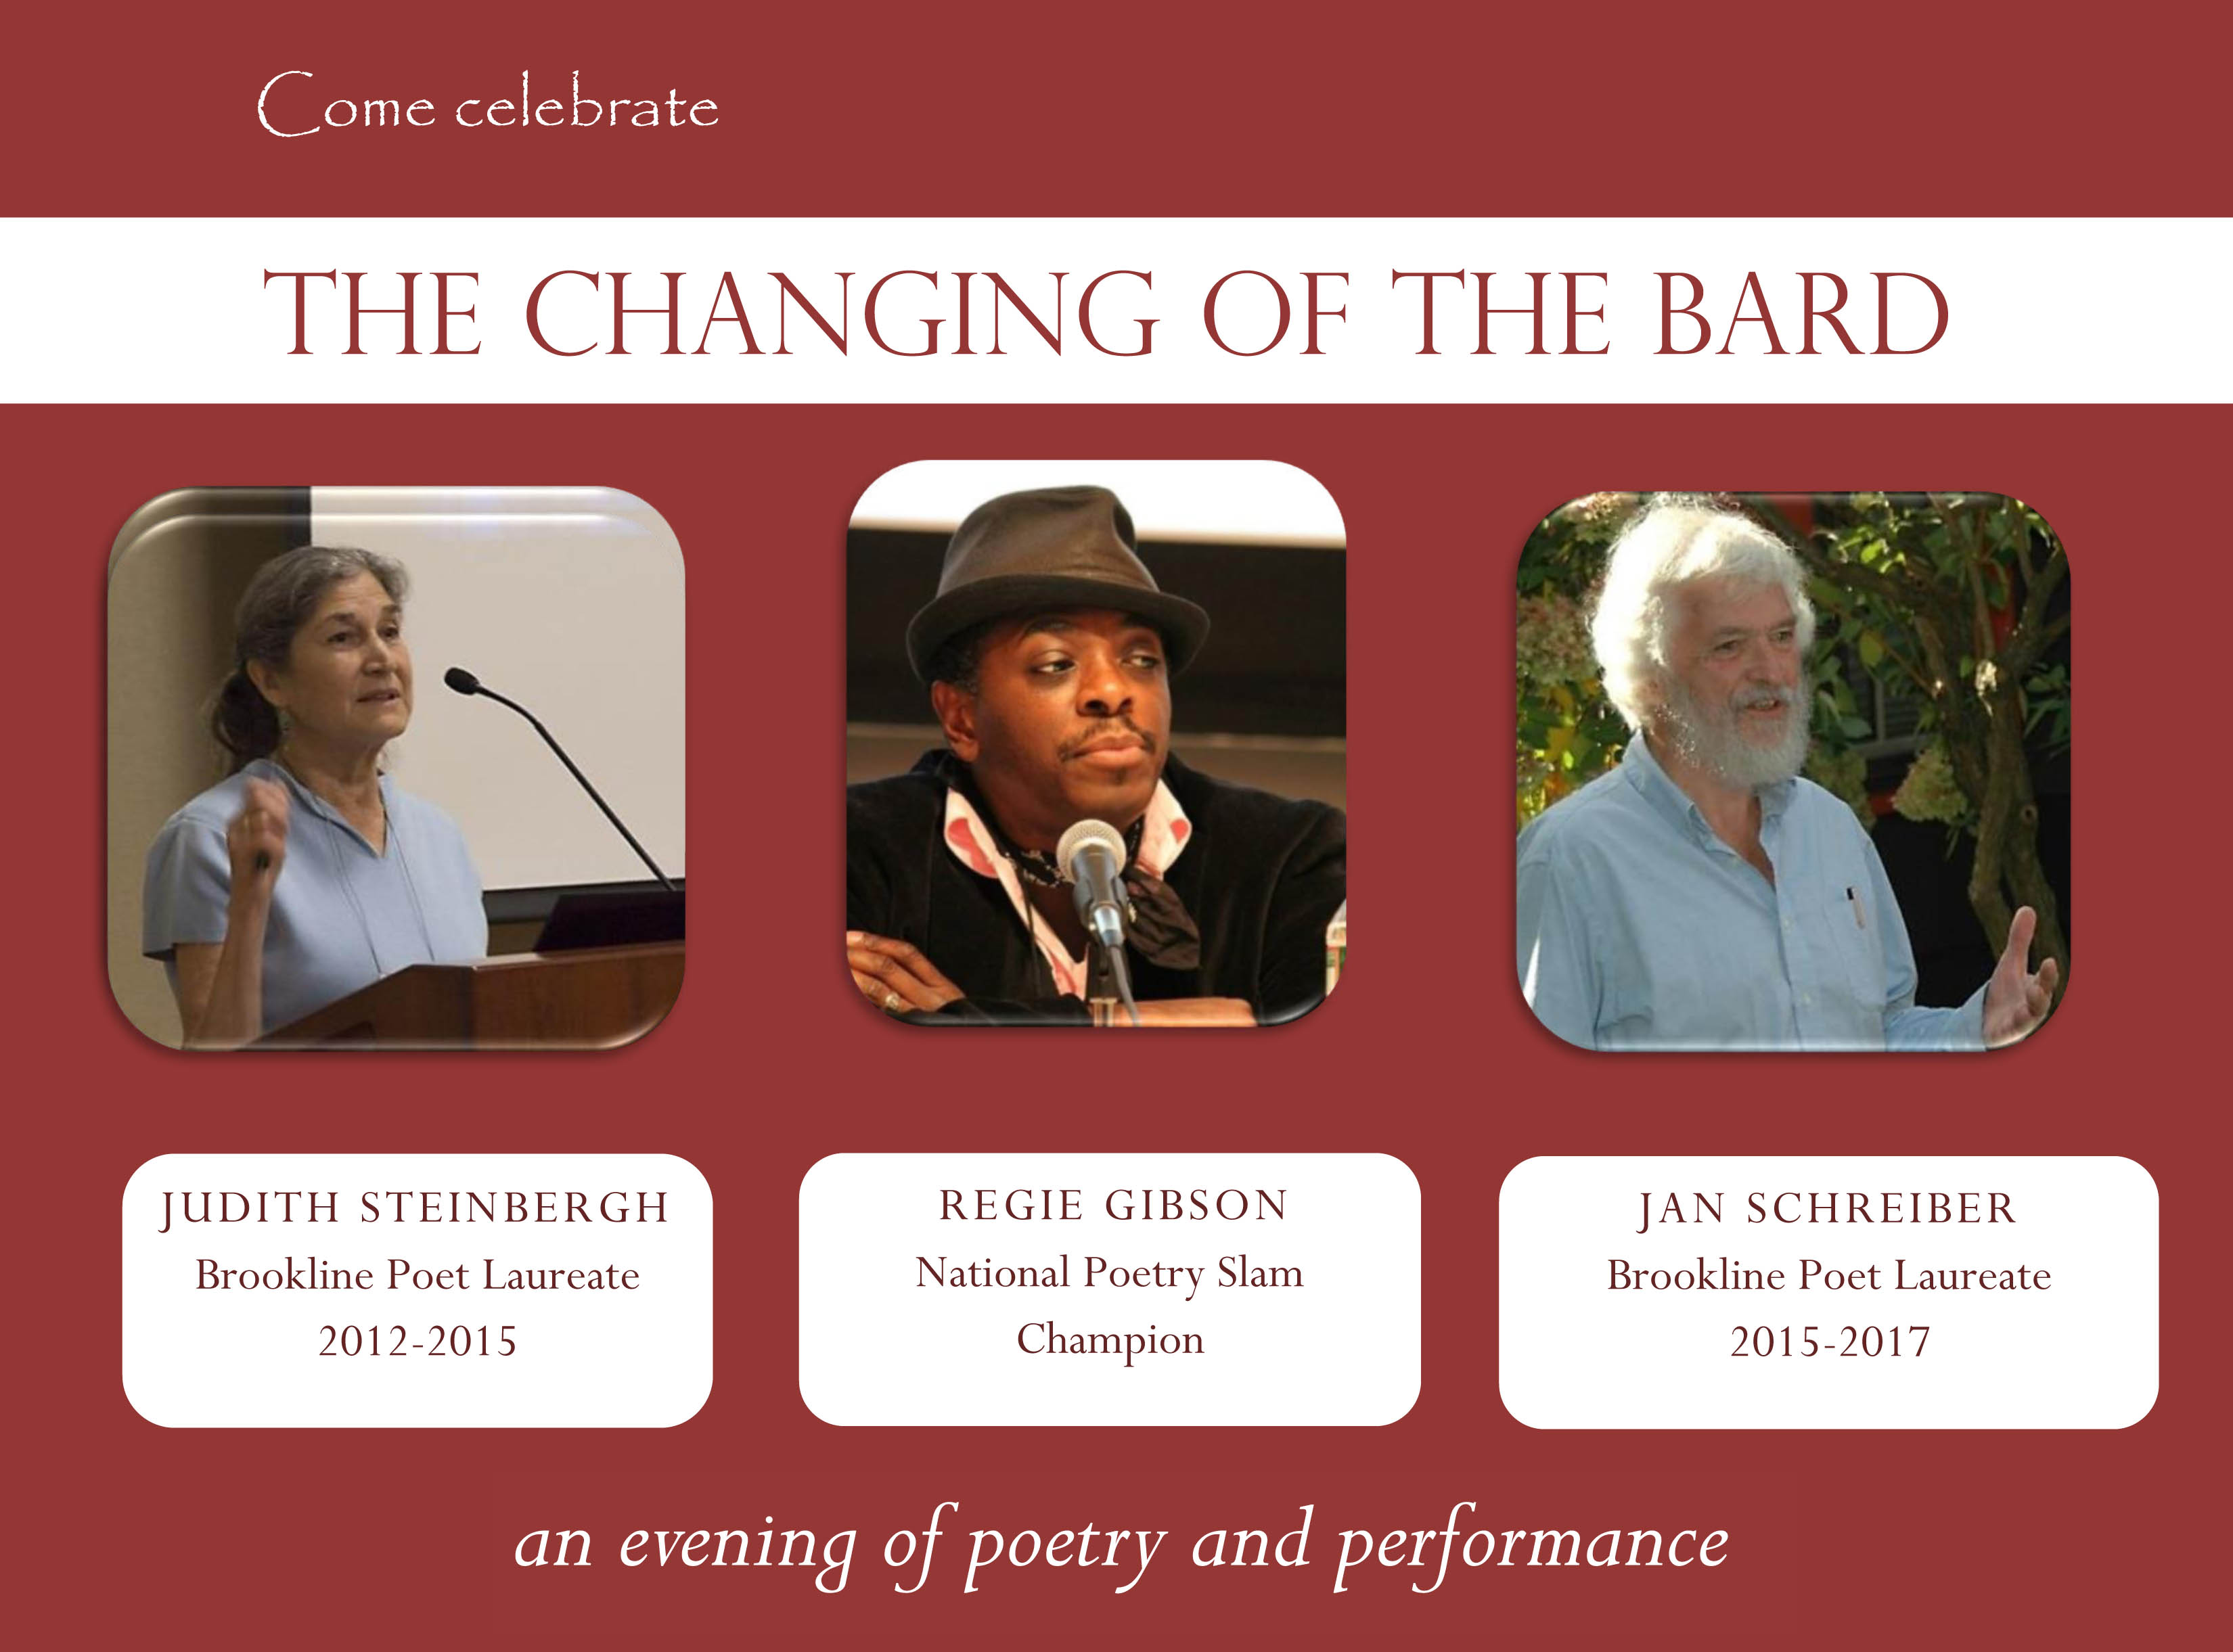 An evening of poetry and performance with Judith Steinbergh, Regie Gibson and Jan Schreiber, to celebrate the poet laureates of Brookline